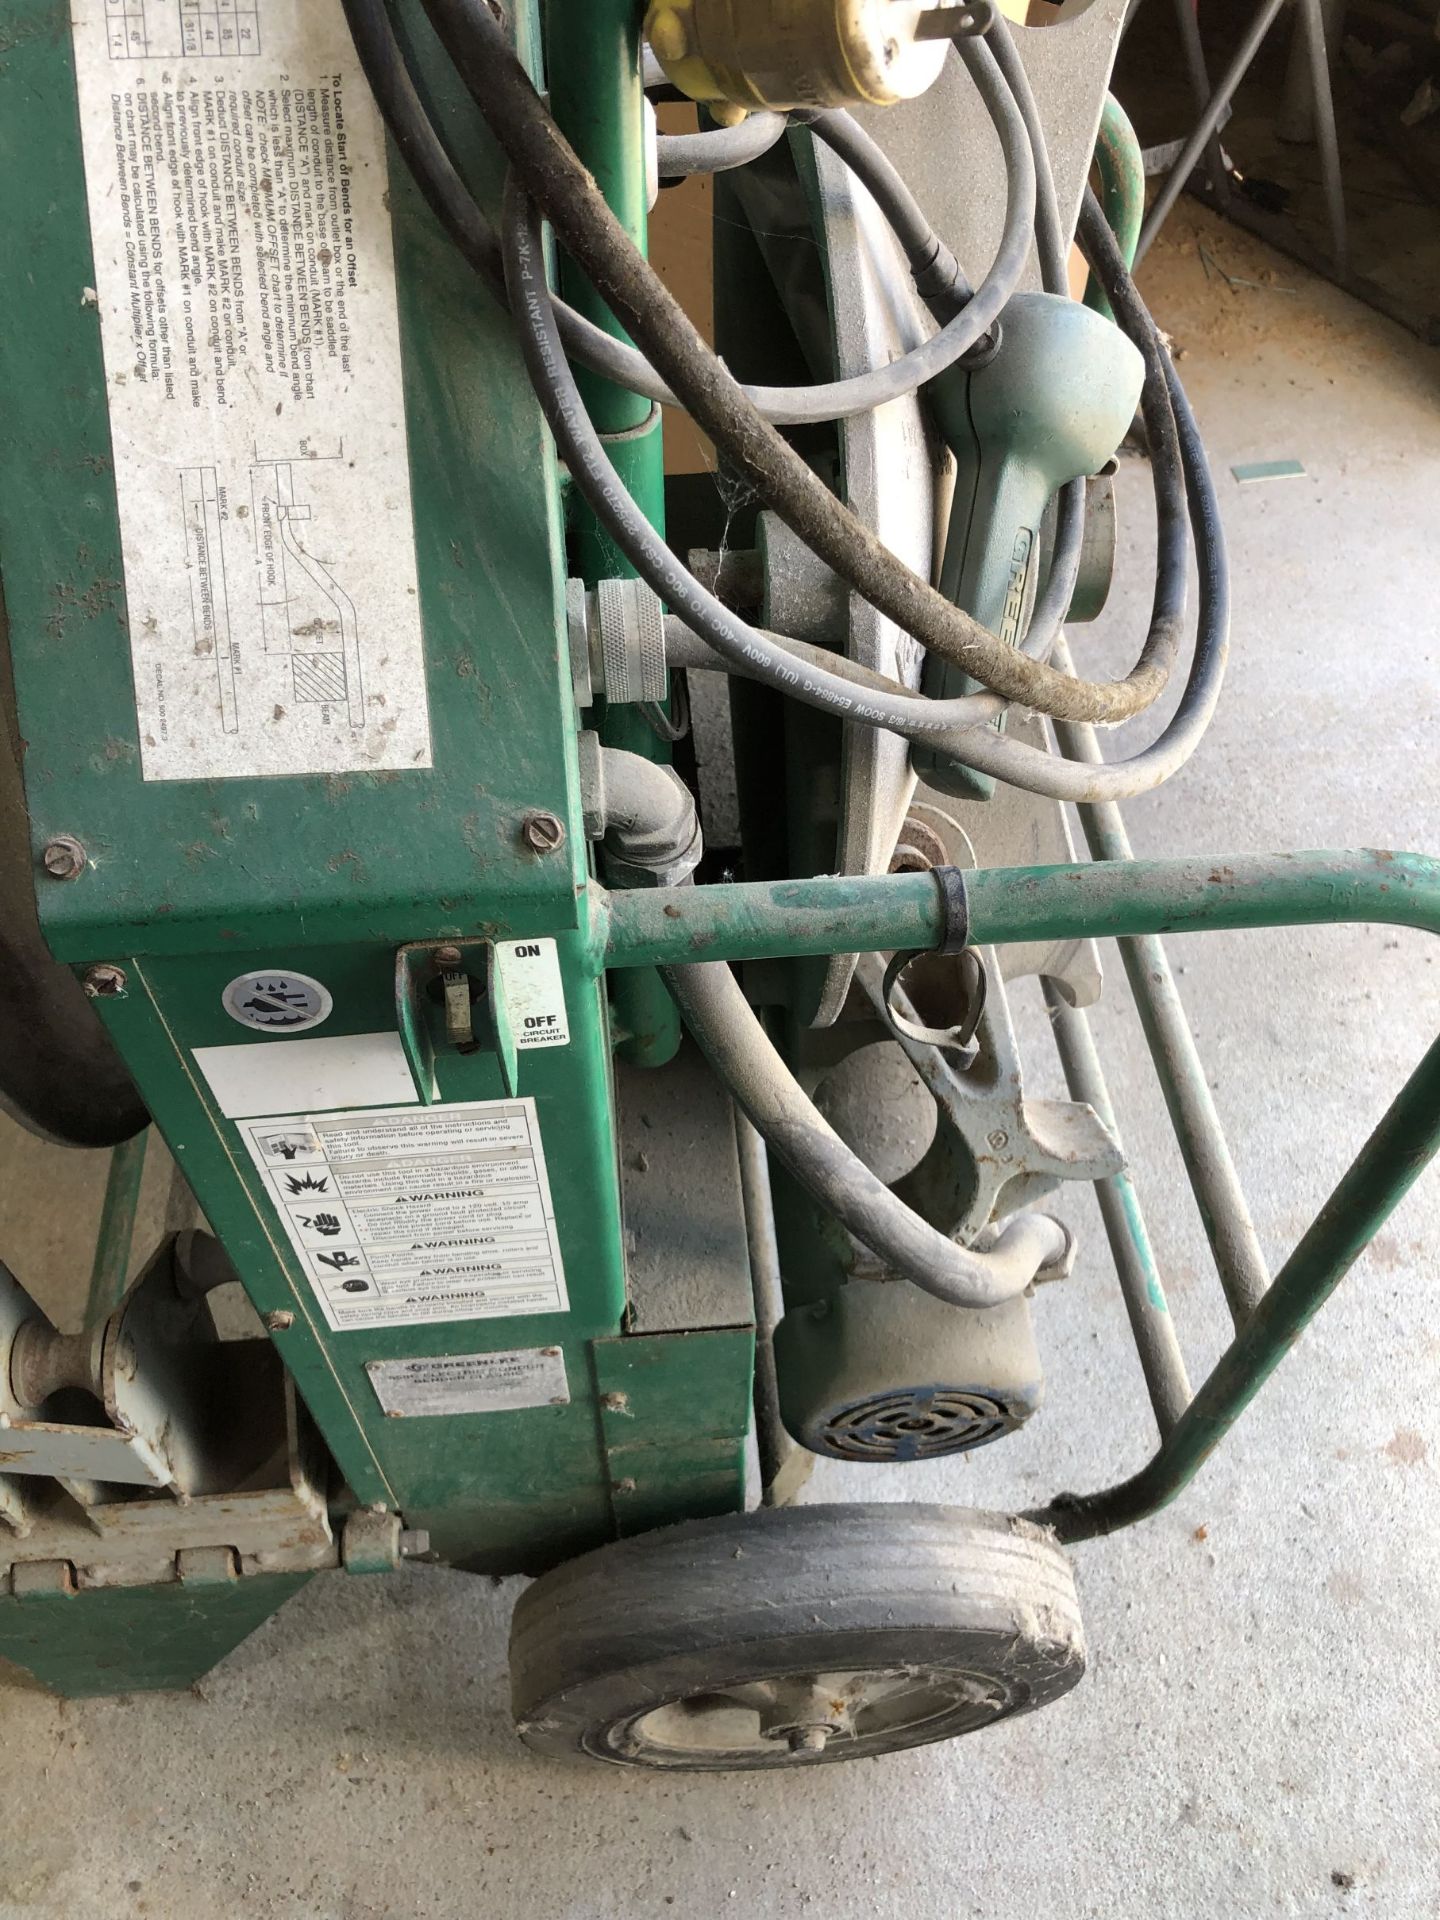 Greenlee Model 555C Electrical Conduit Bender, Conduit Sizes Range From .5" - 2" - Image 3 of 6